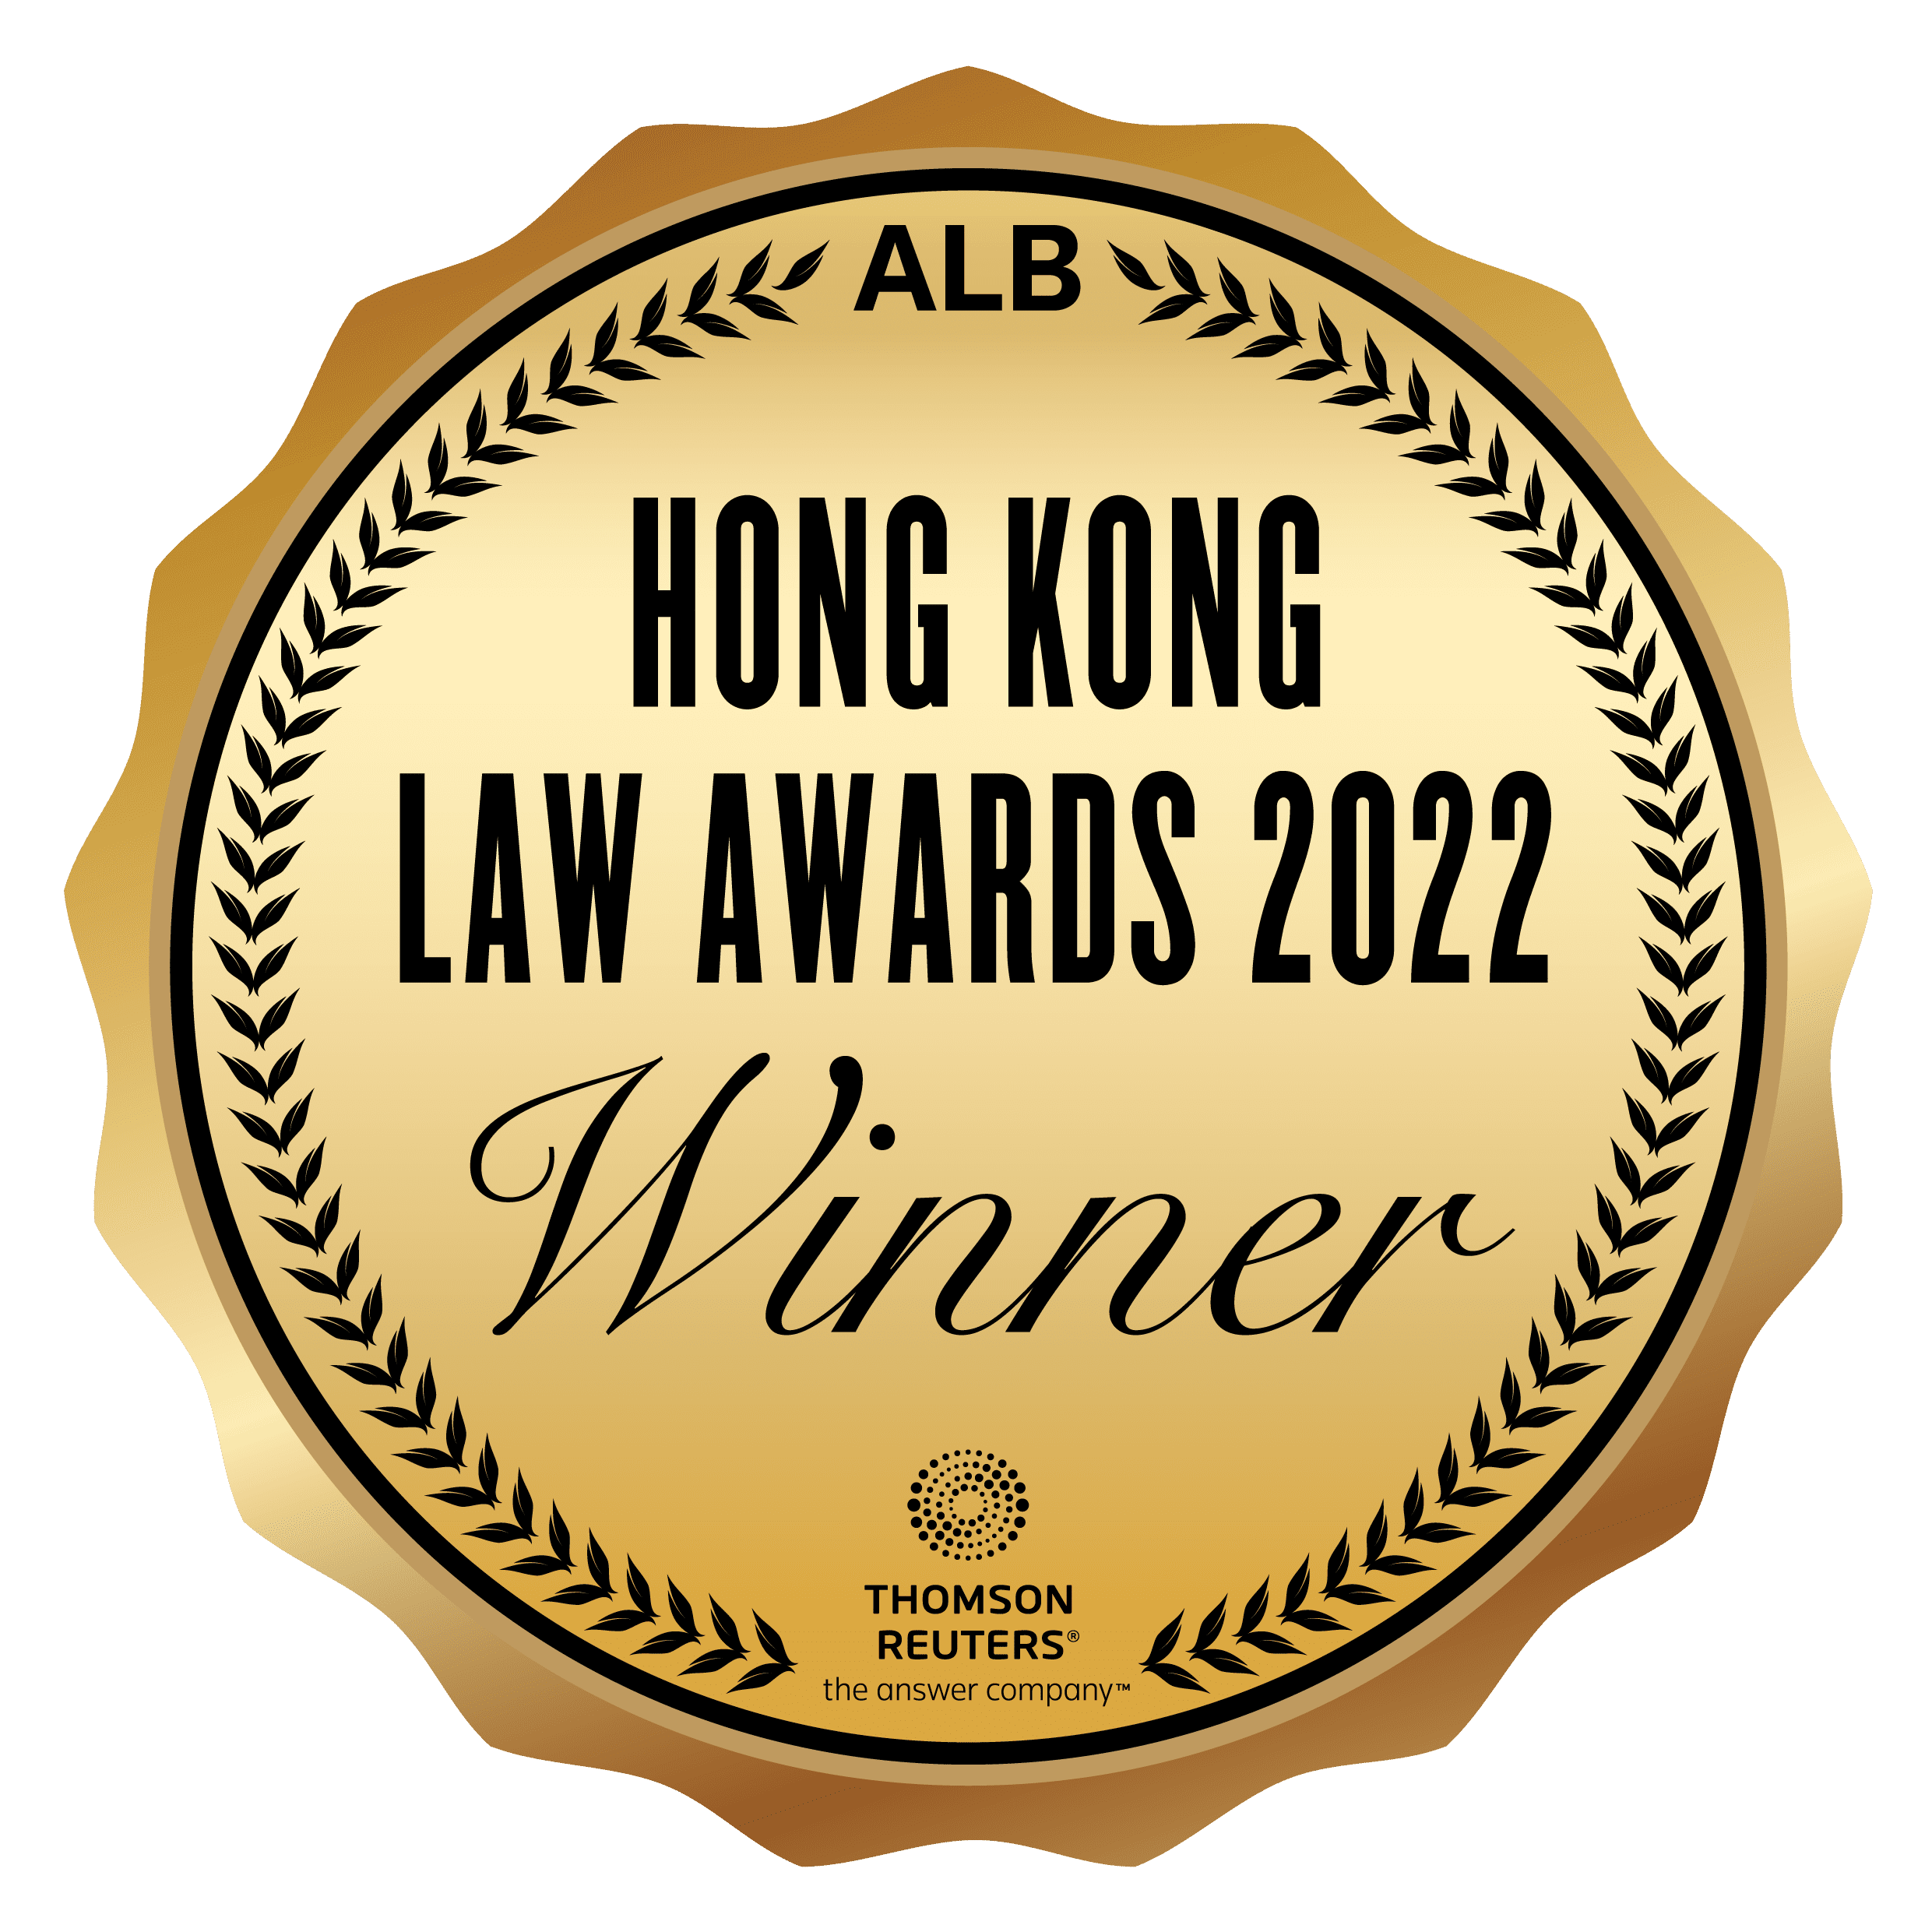 2022 Kingfisher ALB Hong Kong Awards as Matrimonial and Family Law Firm of the Year